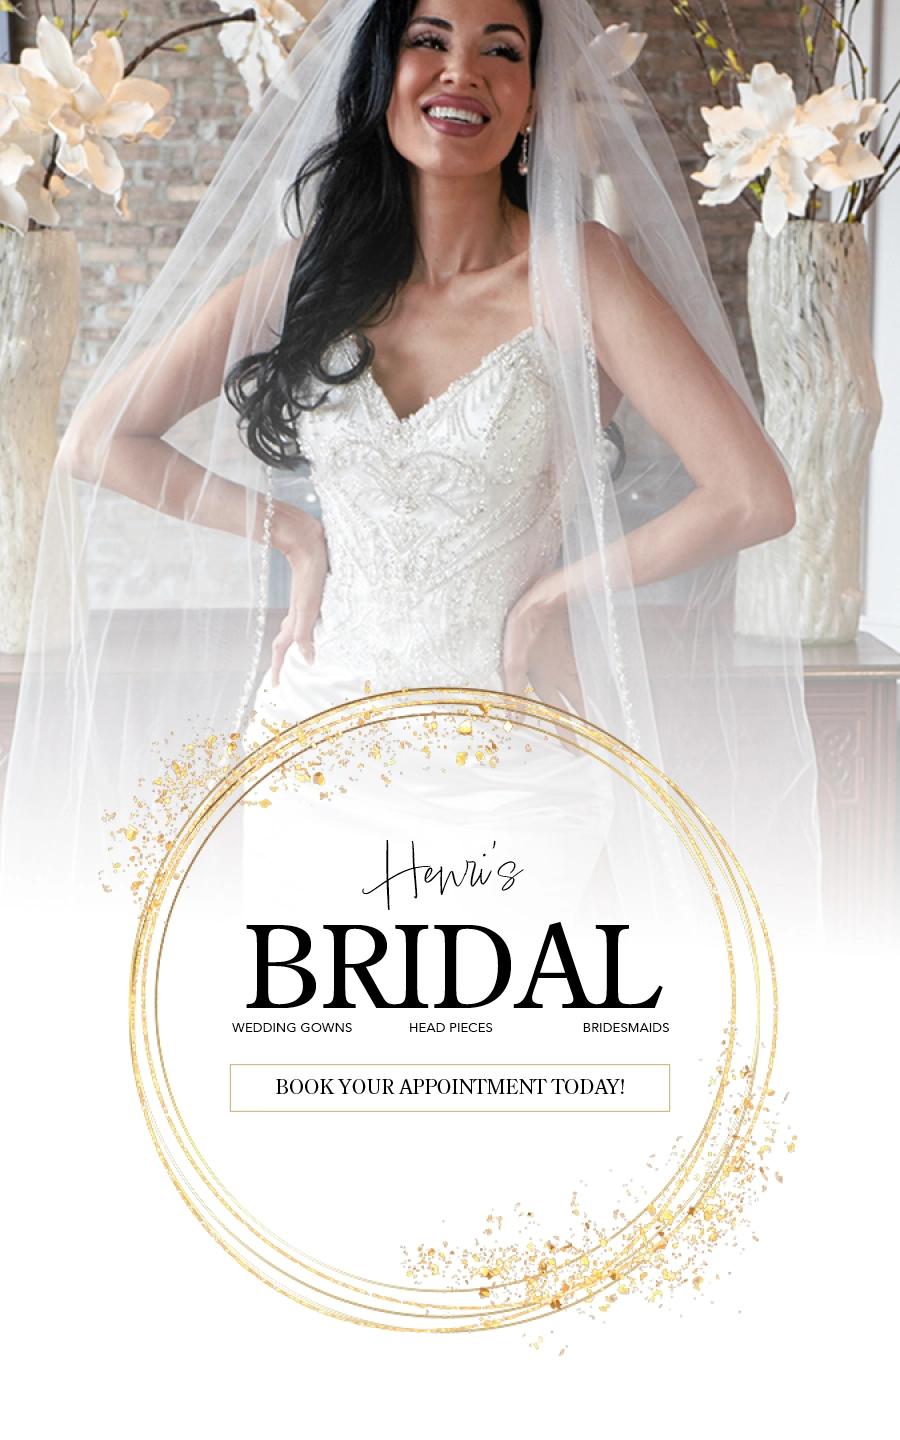 Schedule Your Bridal Appointment